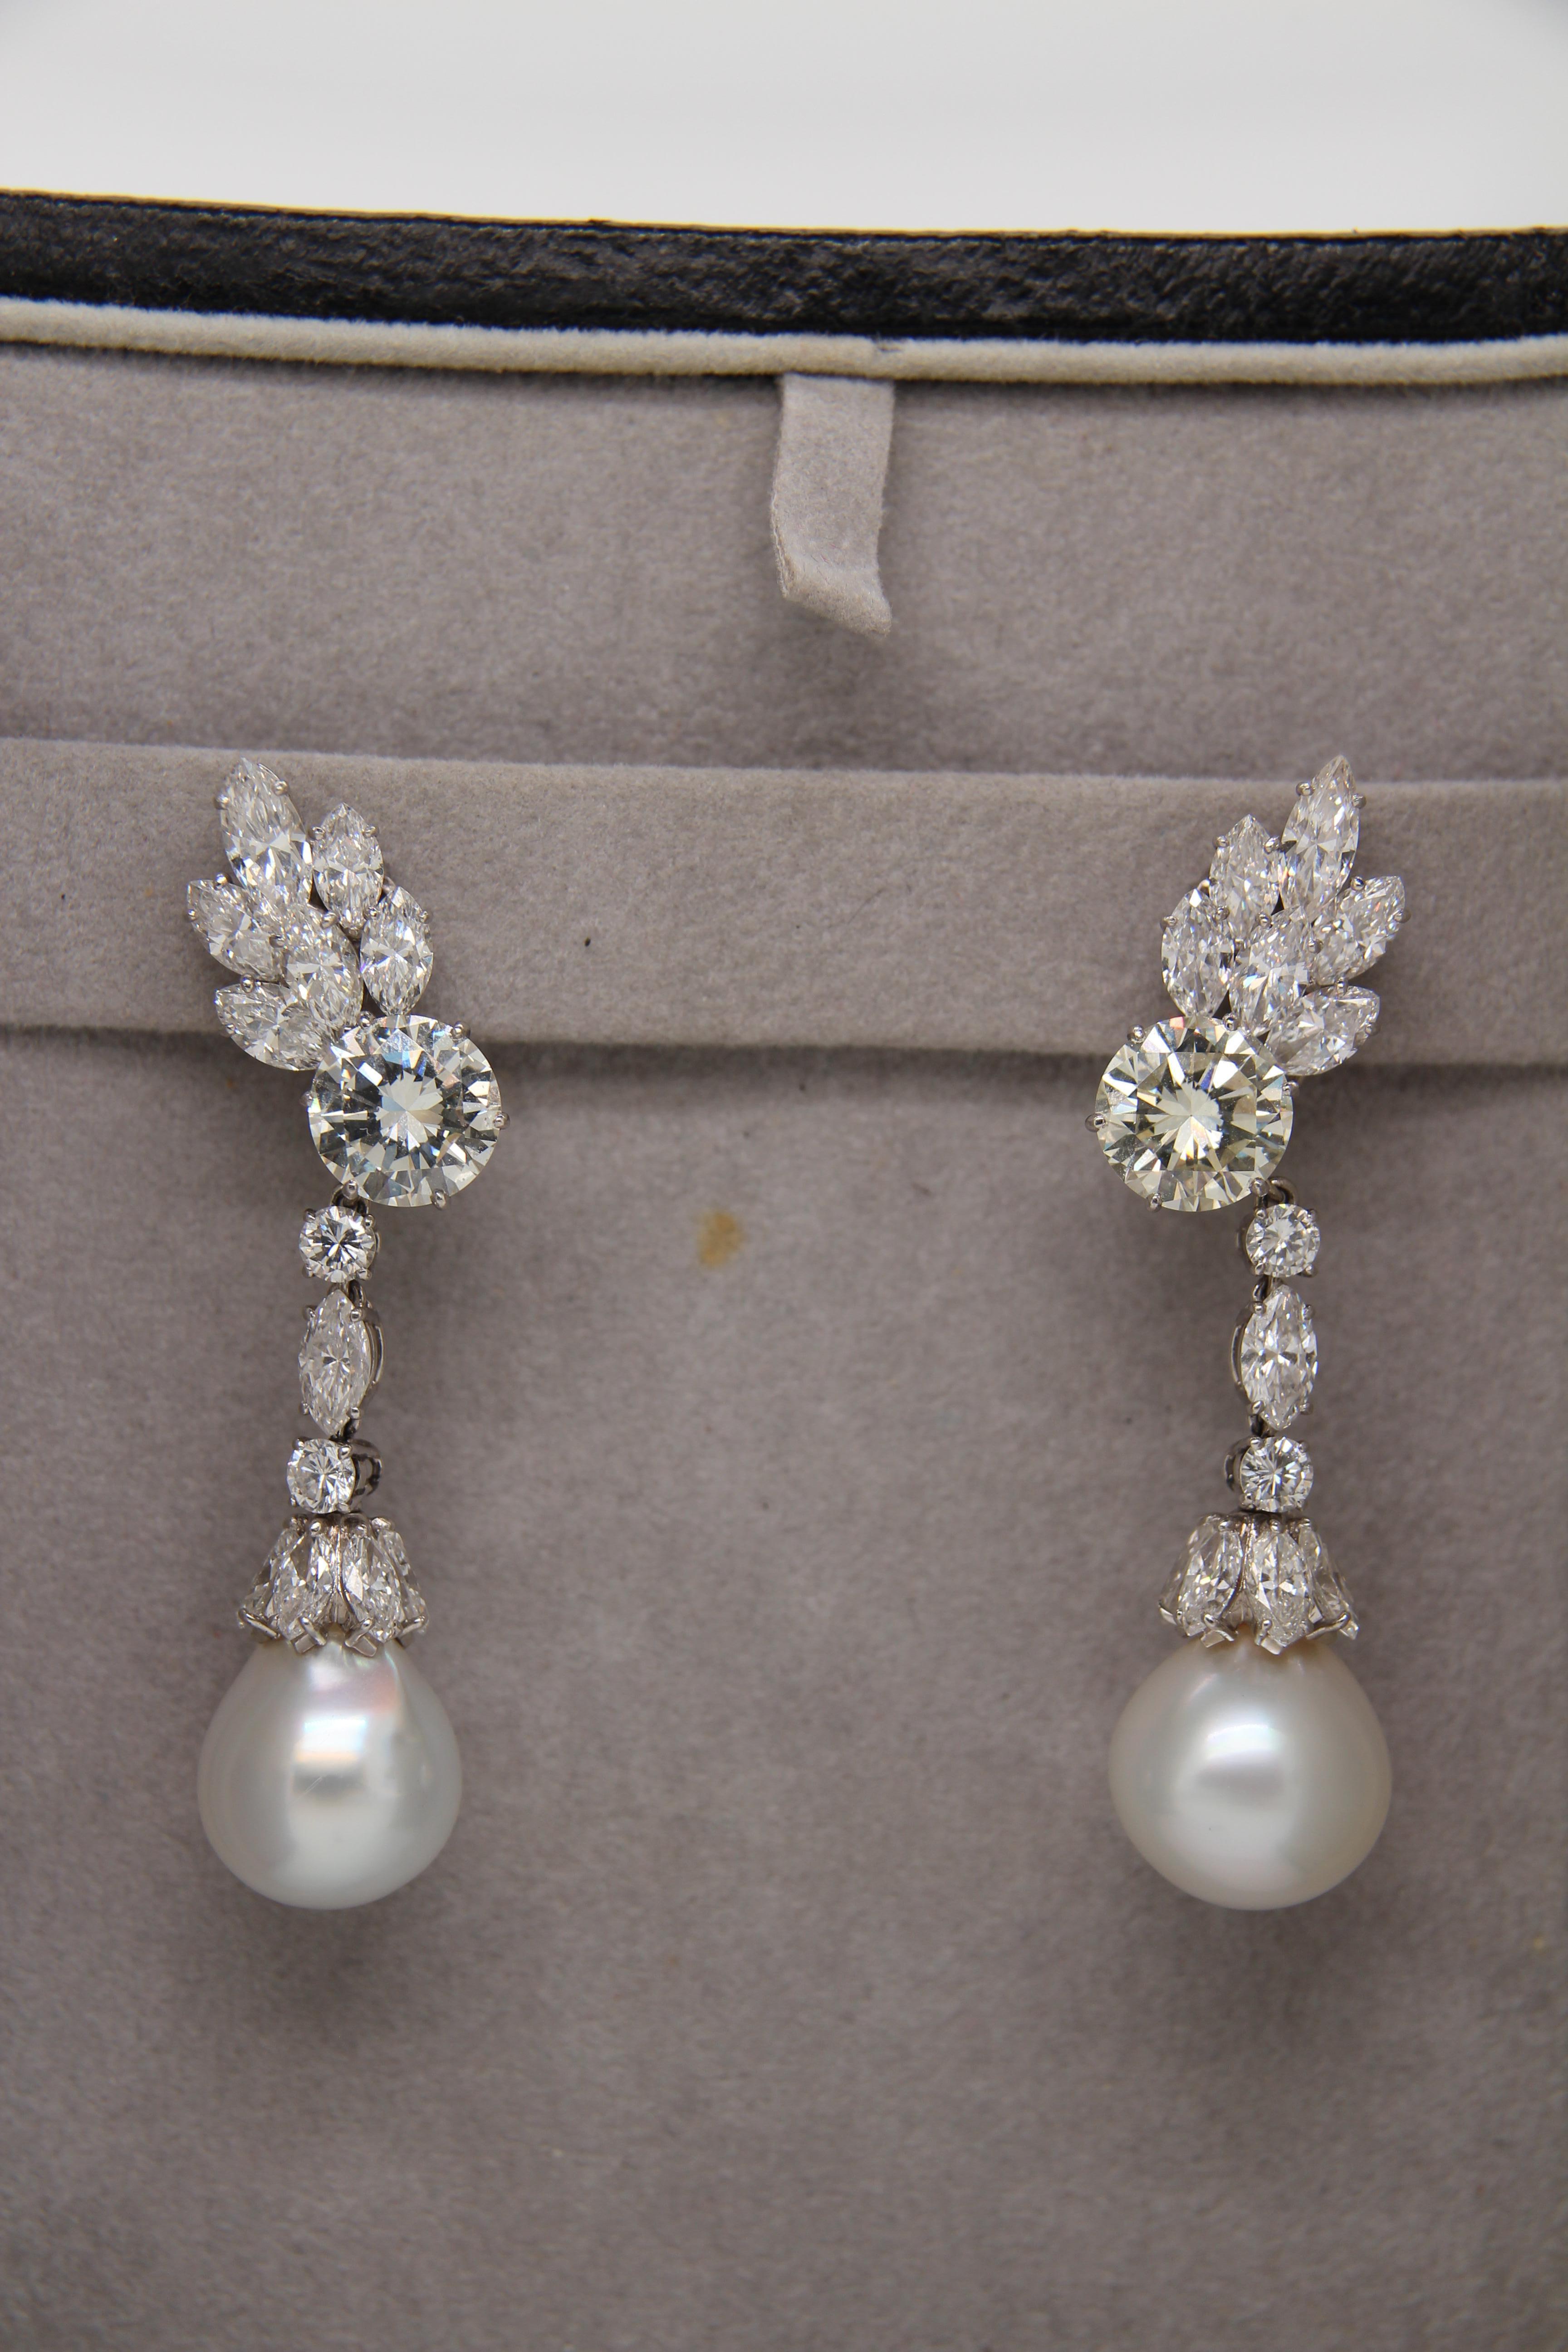 BVLGARI Pearl Earrings. Pearl pair weighing 40.00 carat approximately and diamonds weighing 15.00 carat approximately. The earring is made in 18 karat white gold 24.45 g gross weight